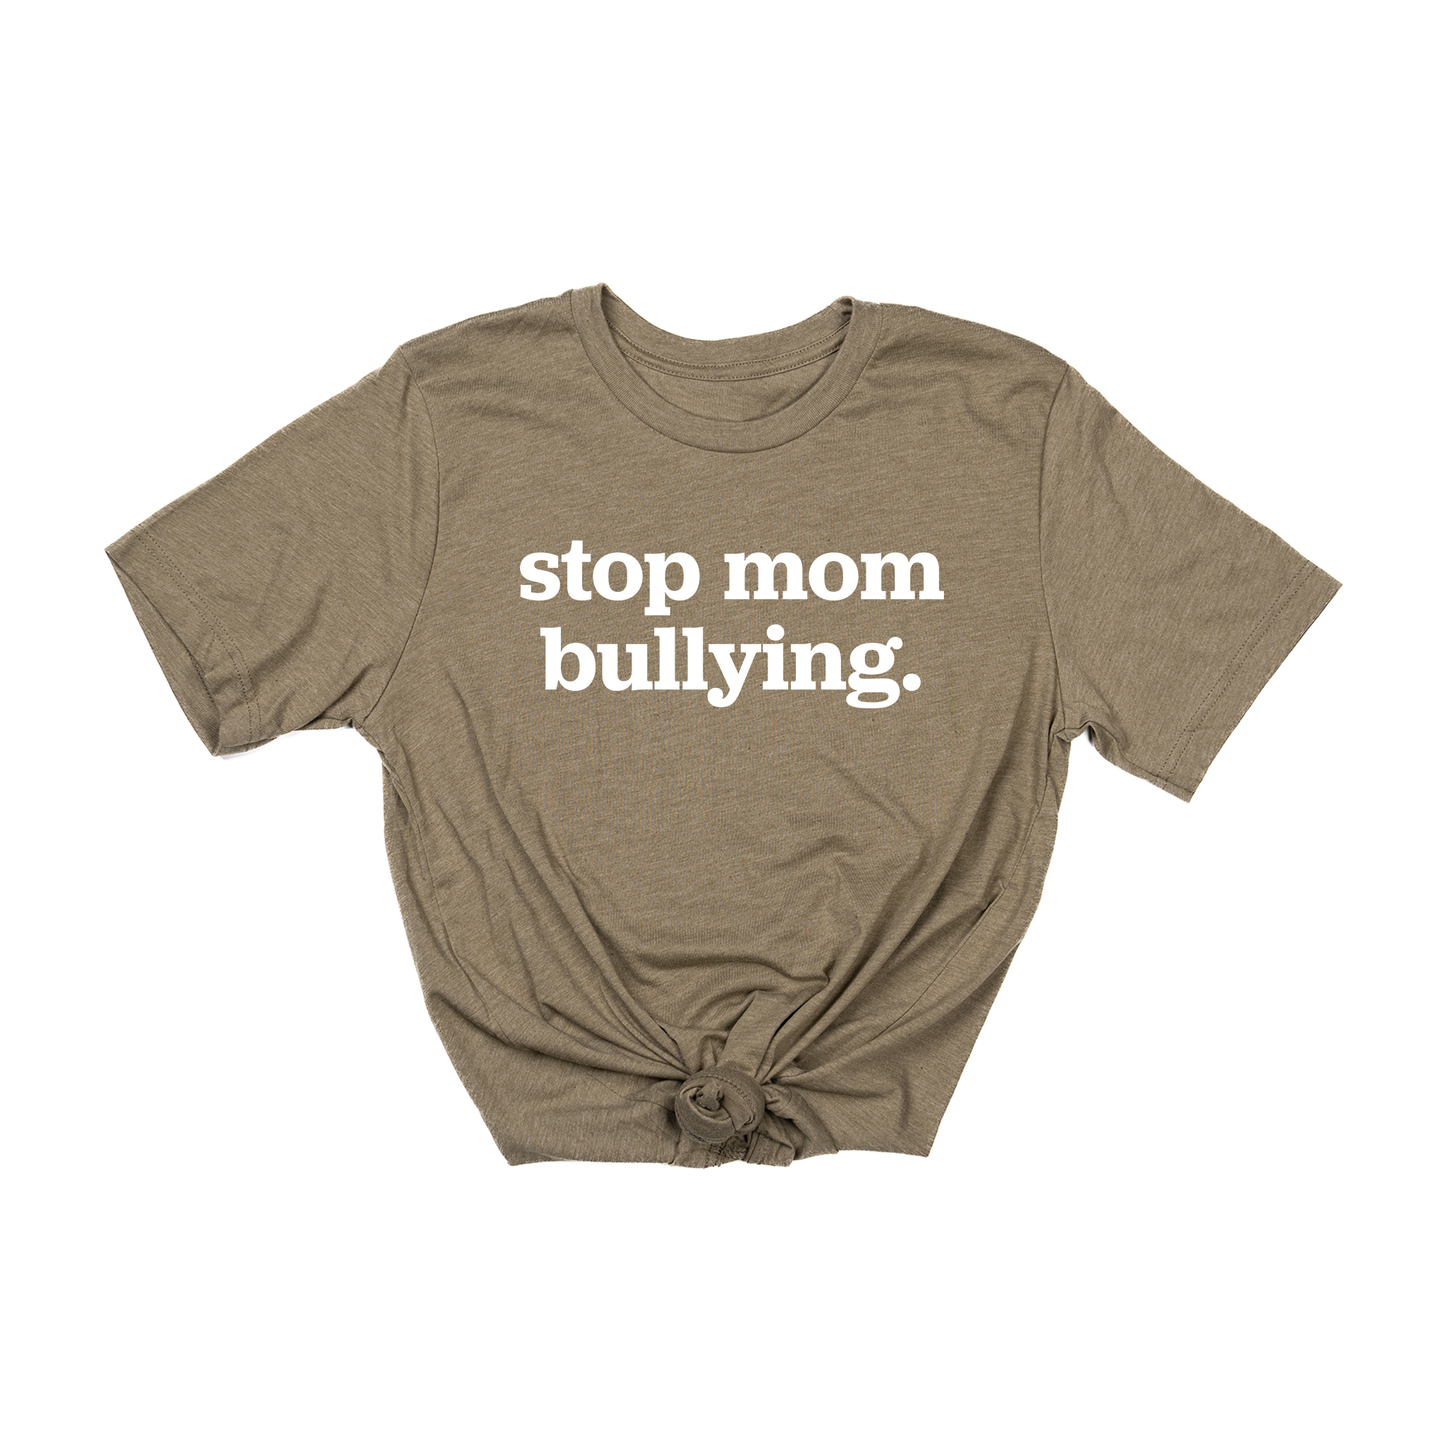 Stop Mom Bullying (Across Front, White) - Tee (Olive)